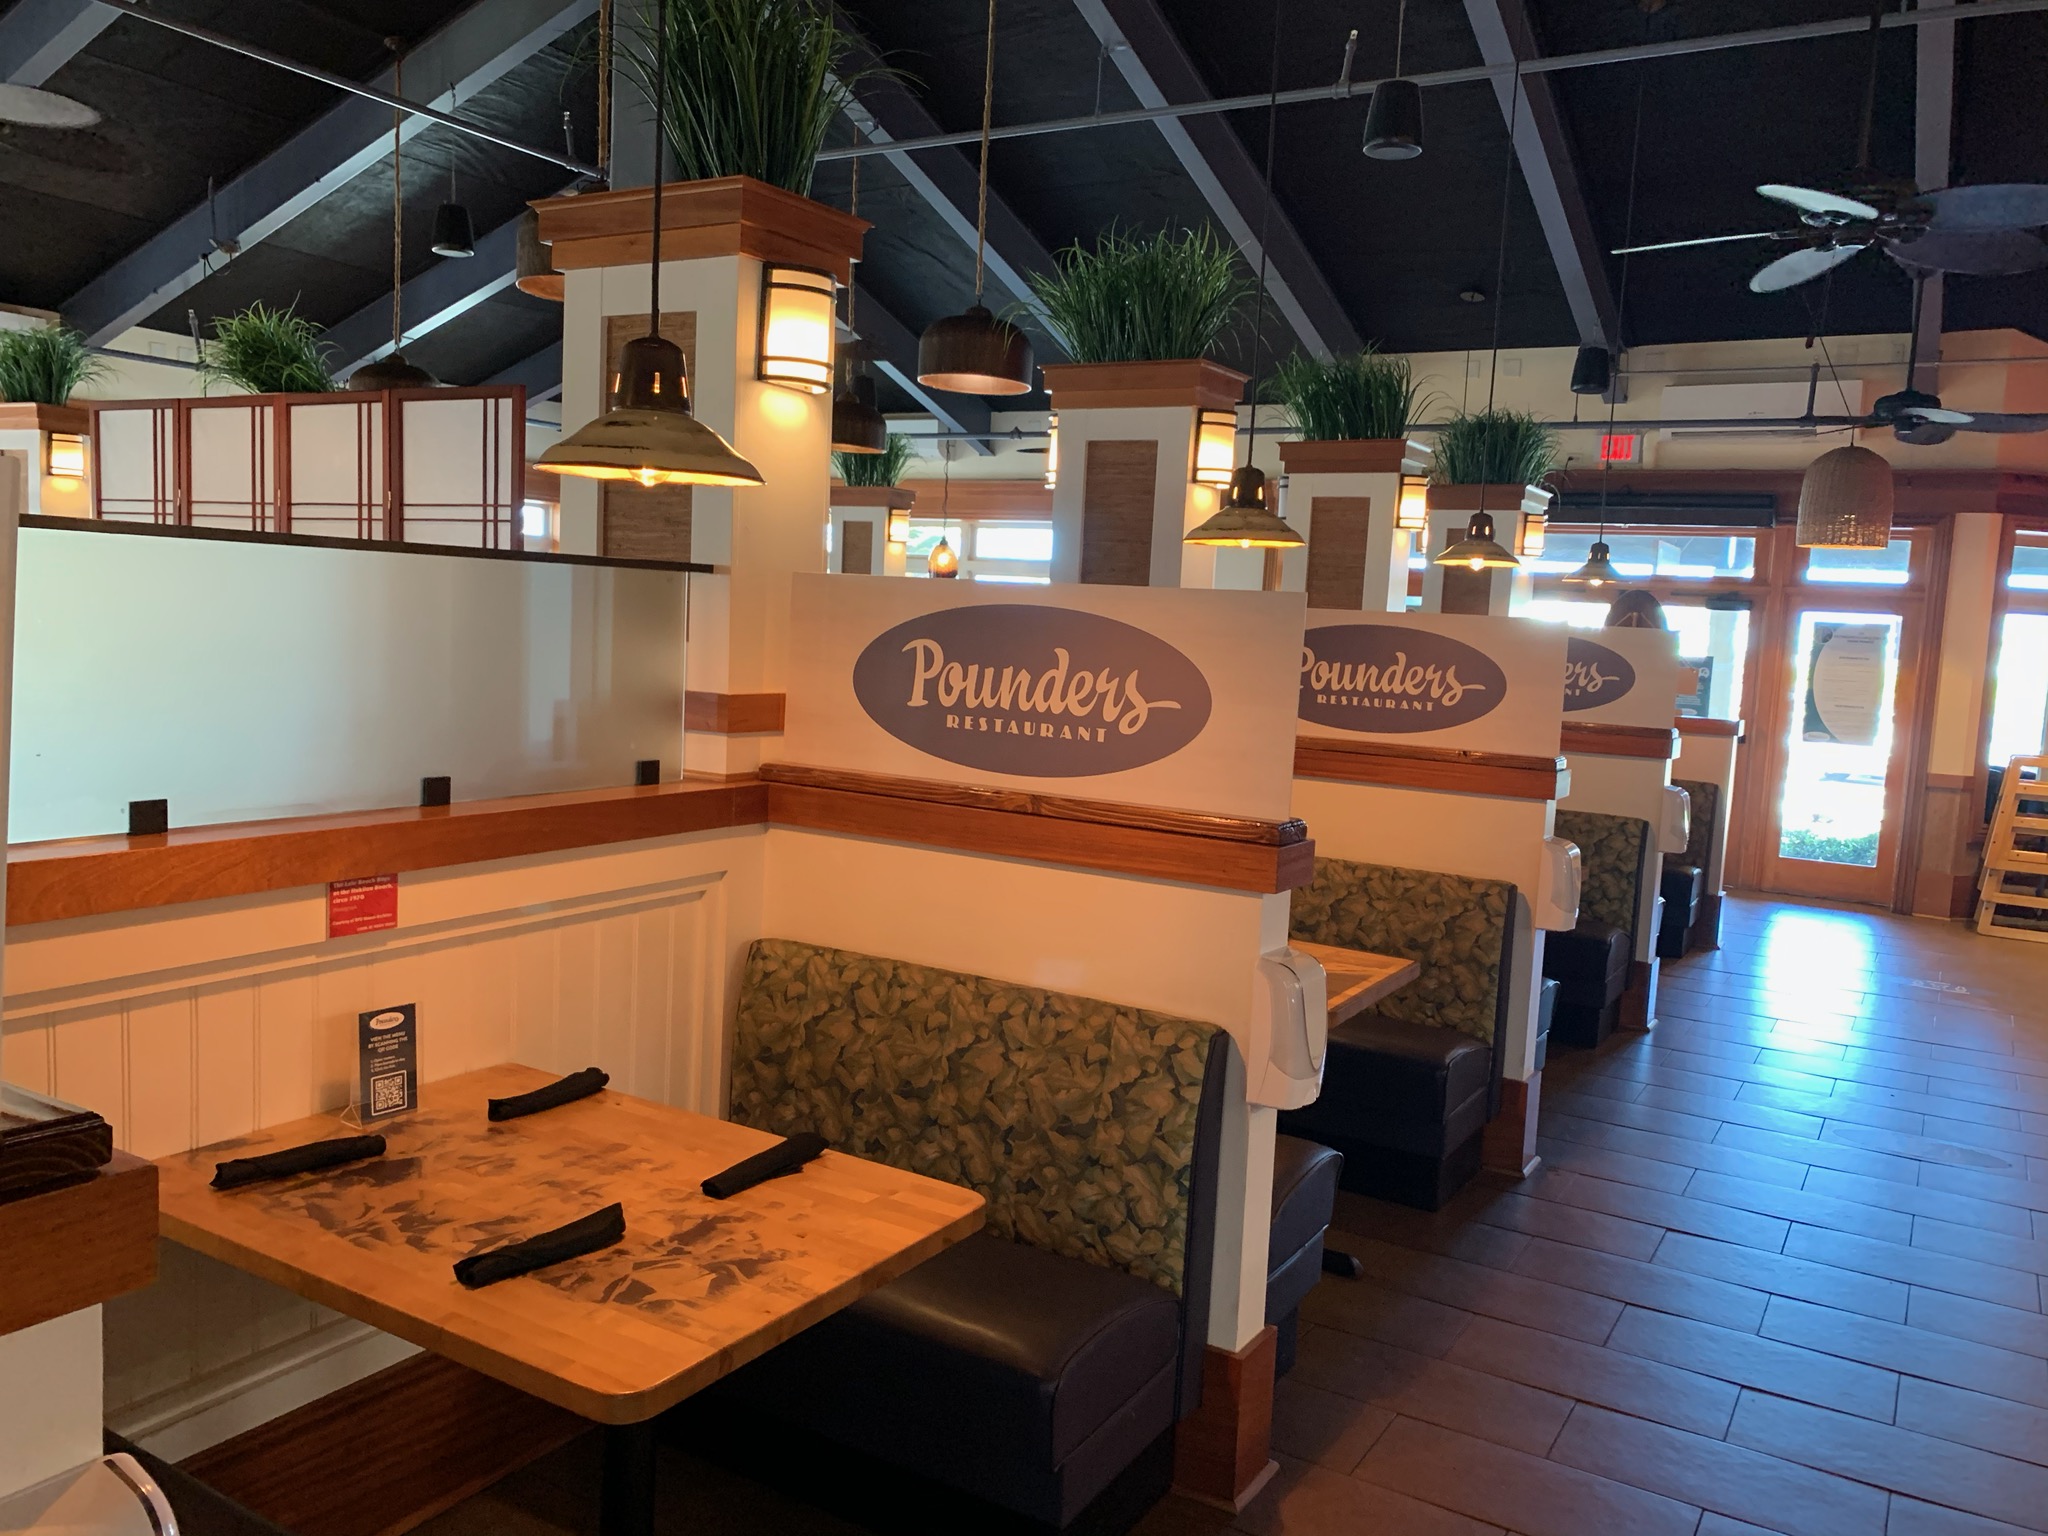 Pounders Restaurant is back open and leading the way